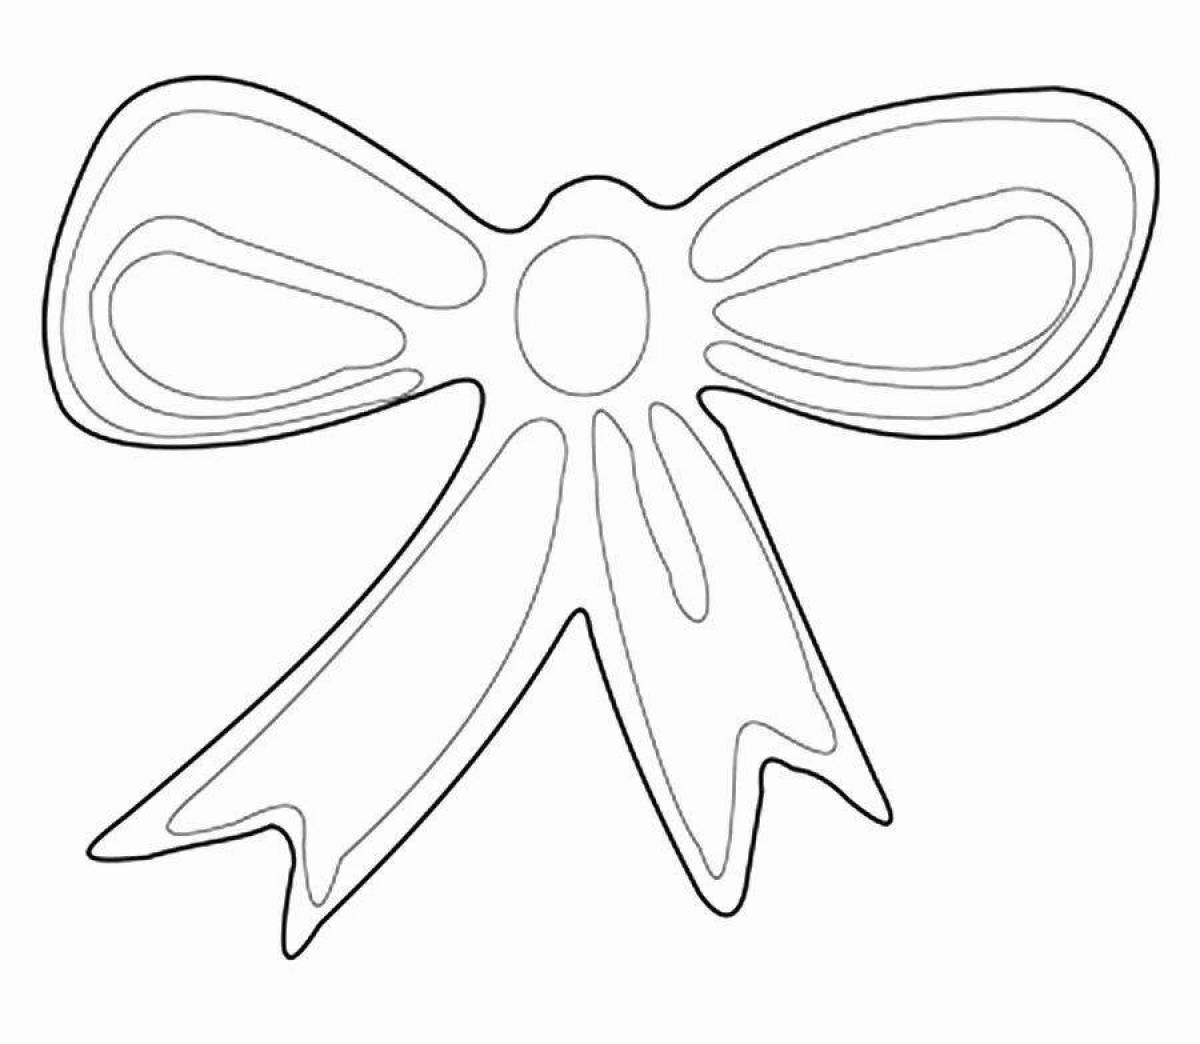 Coloring page ribbon with loop